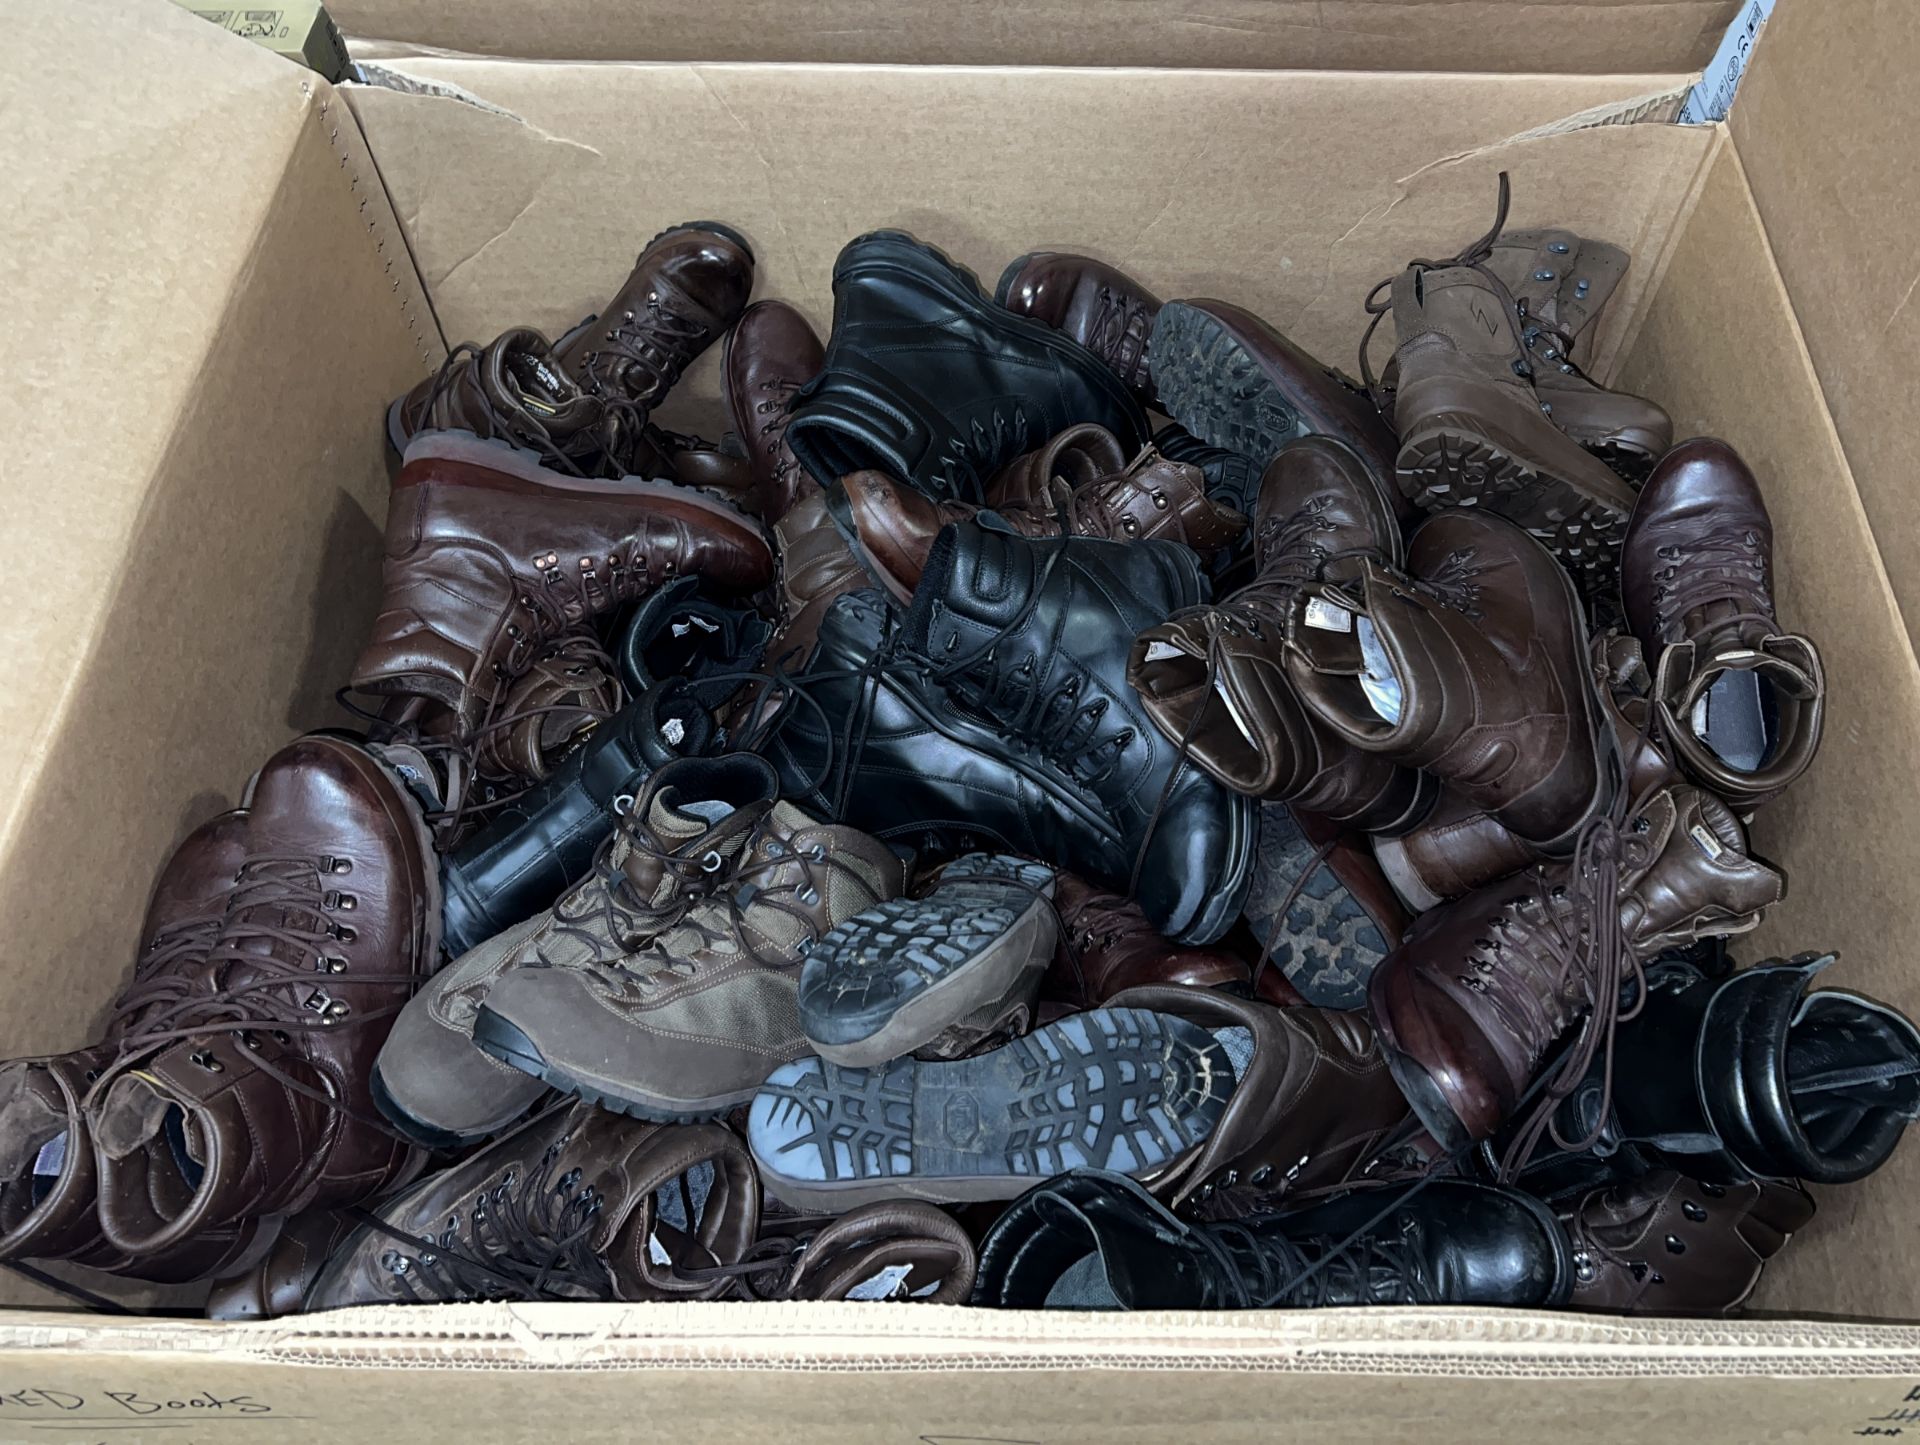 Various boots - Magnum, Haix, YDS - mixed sizes - approx. 50 pairs